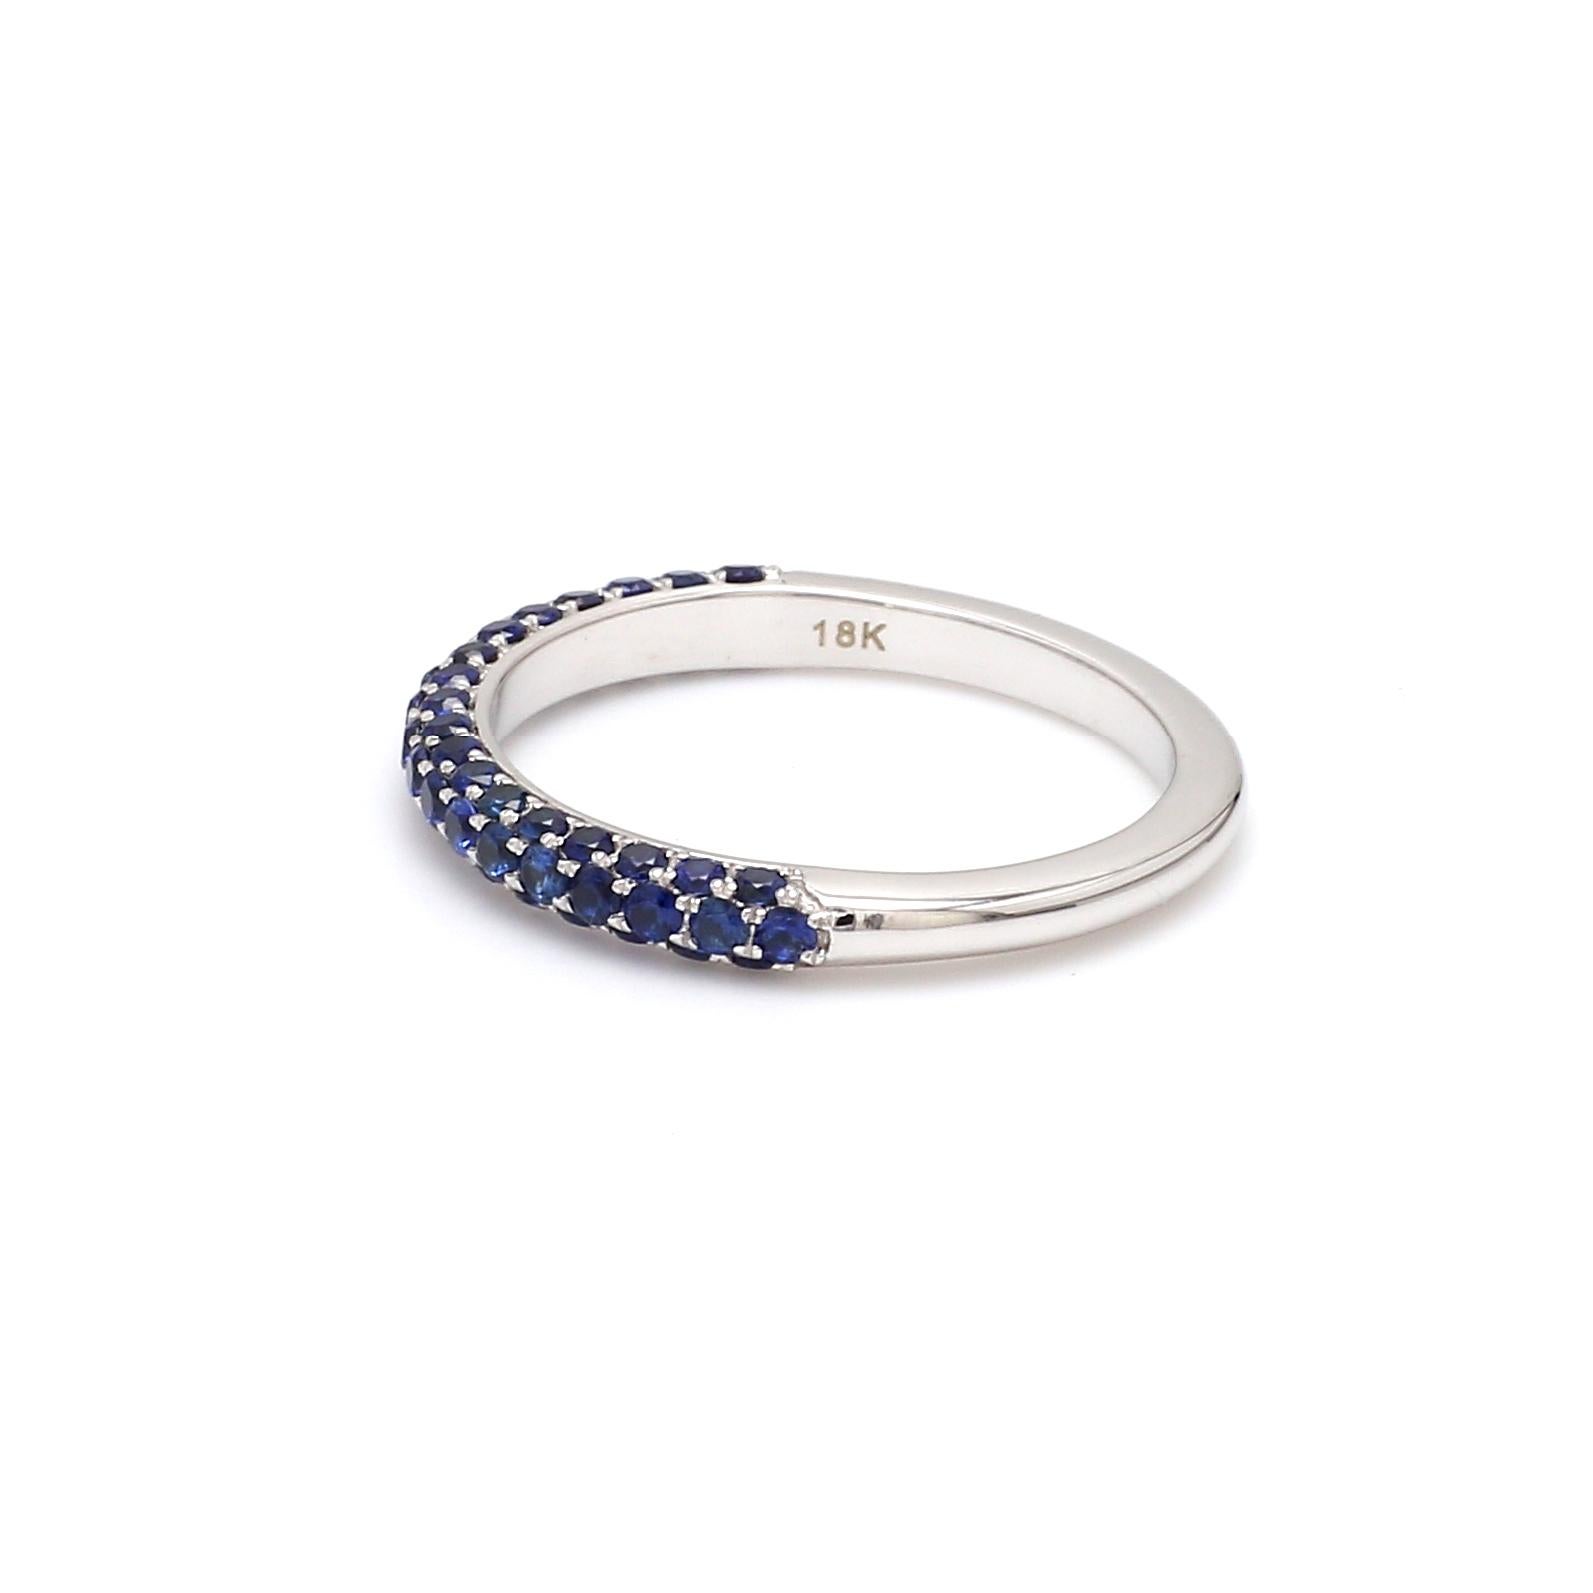 A Beautiful Handcrafted Ring in 18 Karat White Gold with Natural Round Blue Sapphire. A perfect Wedding Ring for the Special occasion

Natural Blue Sapphire Details
Pieces :  55 Pieces
Weight : 0.75 Carat 

Ring Details
Gold : 18 Karat Rose